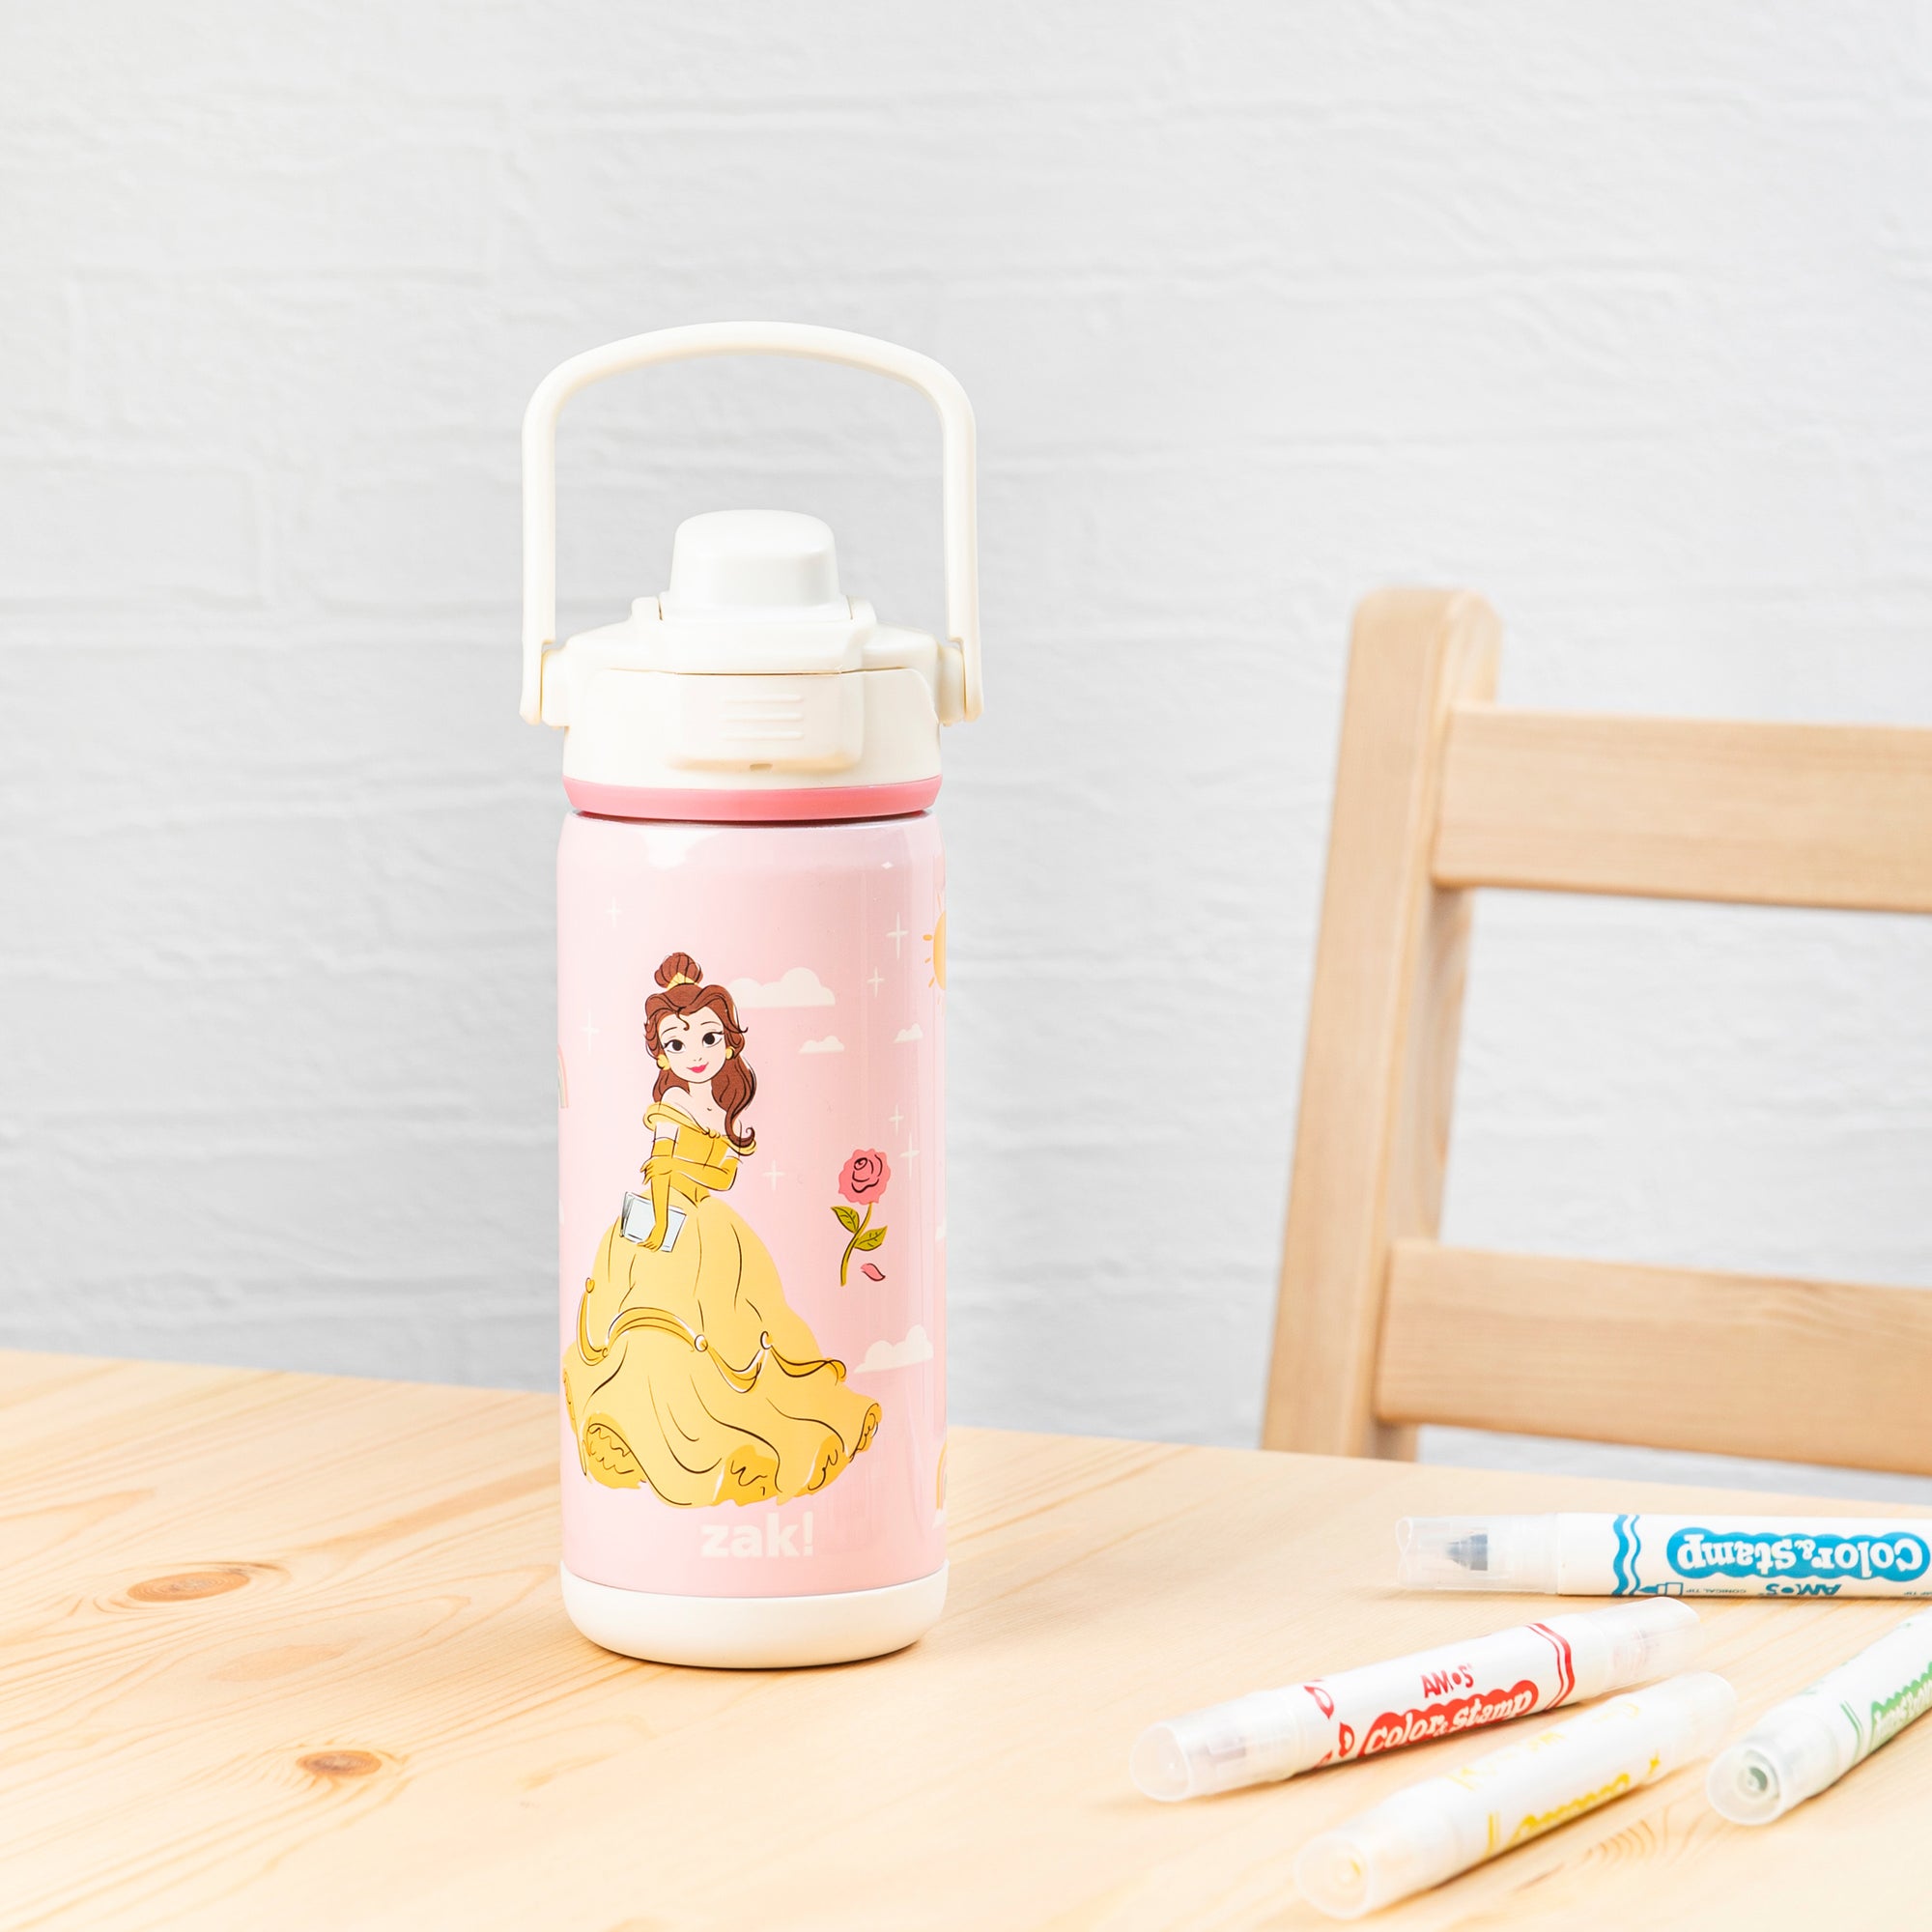 Disney Princess Beacon Stainless Steel Insulated Kids Water Bottle with Covered Spout, 14 Ounces